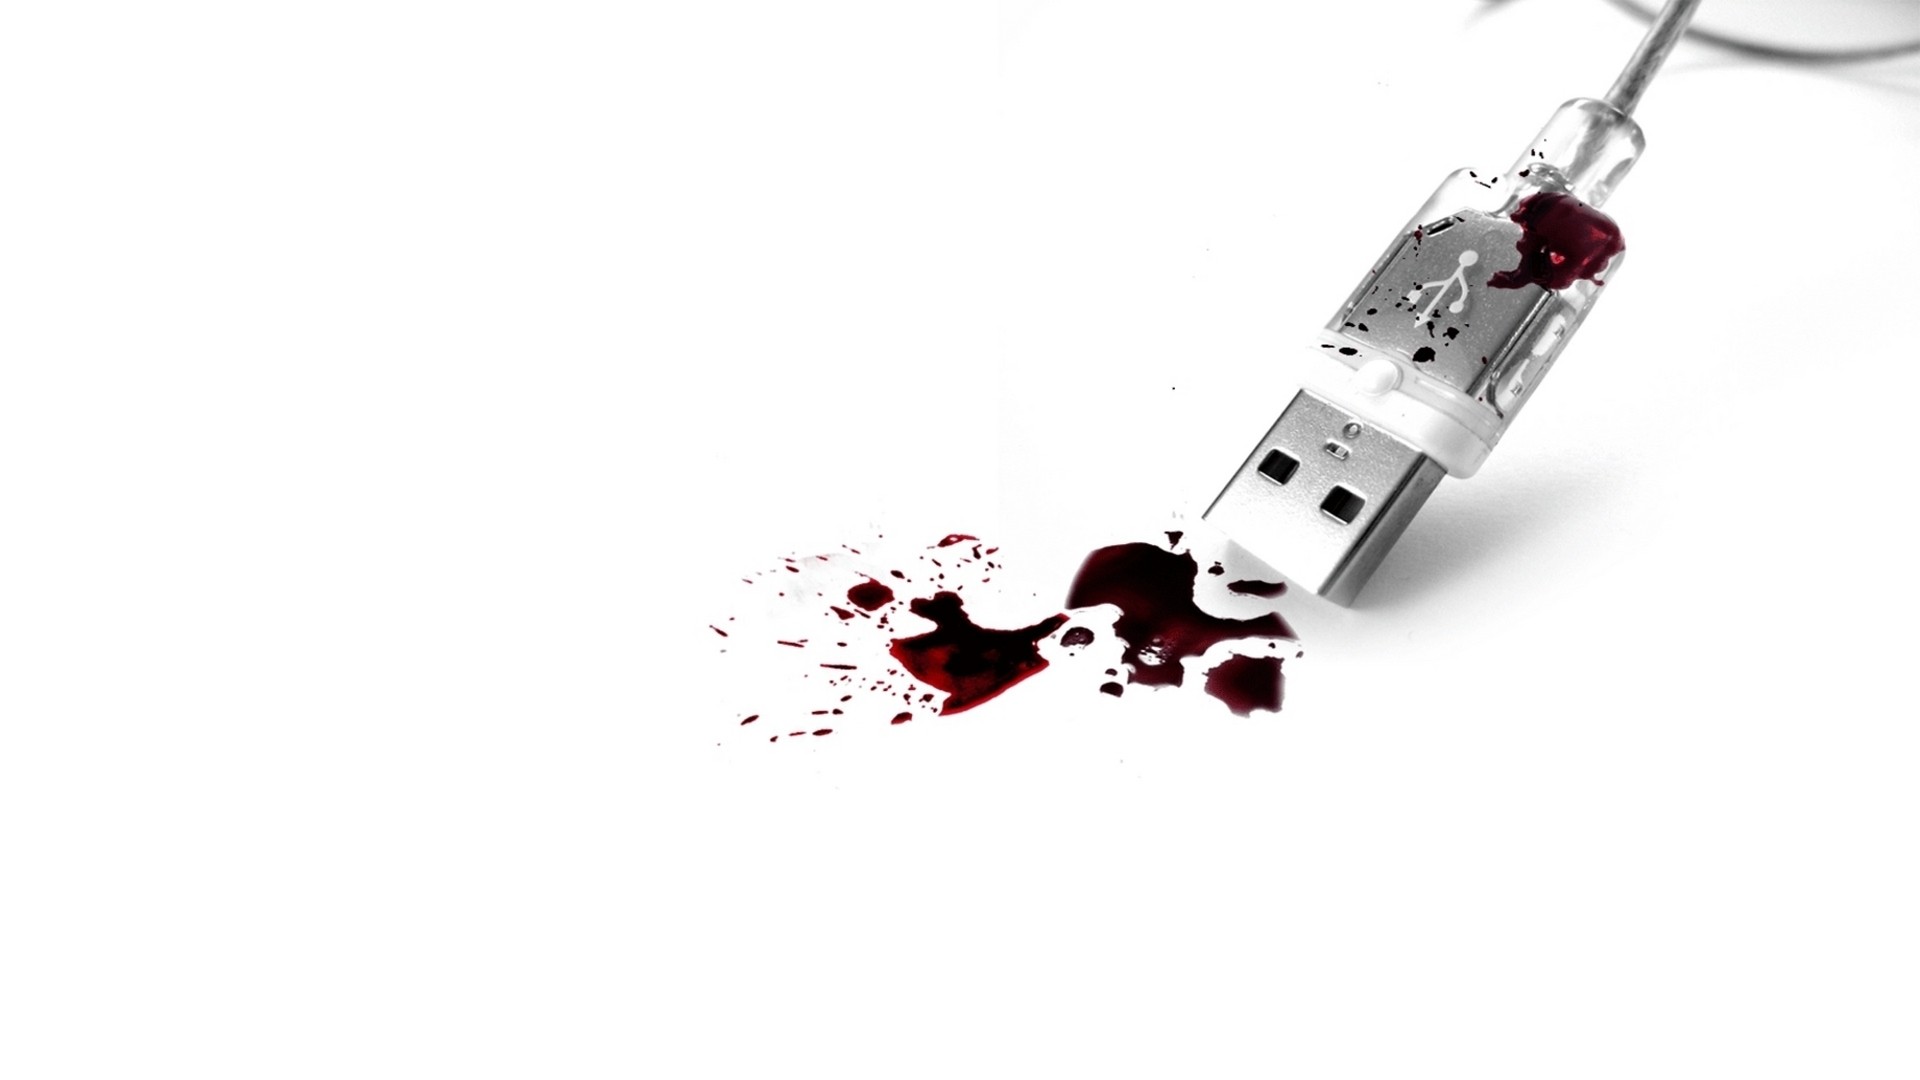 General 1920x1080 USB blood technology white background